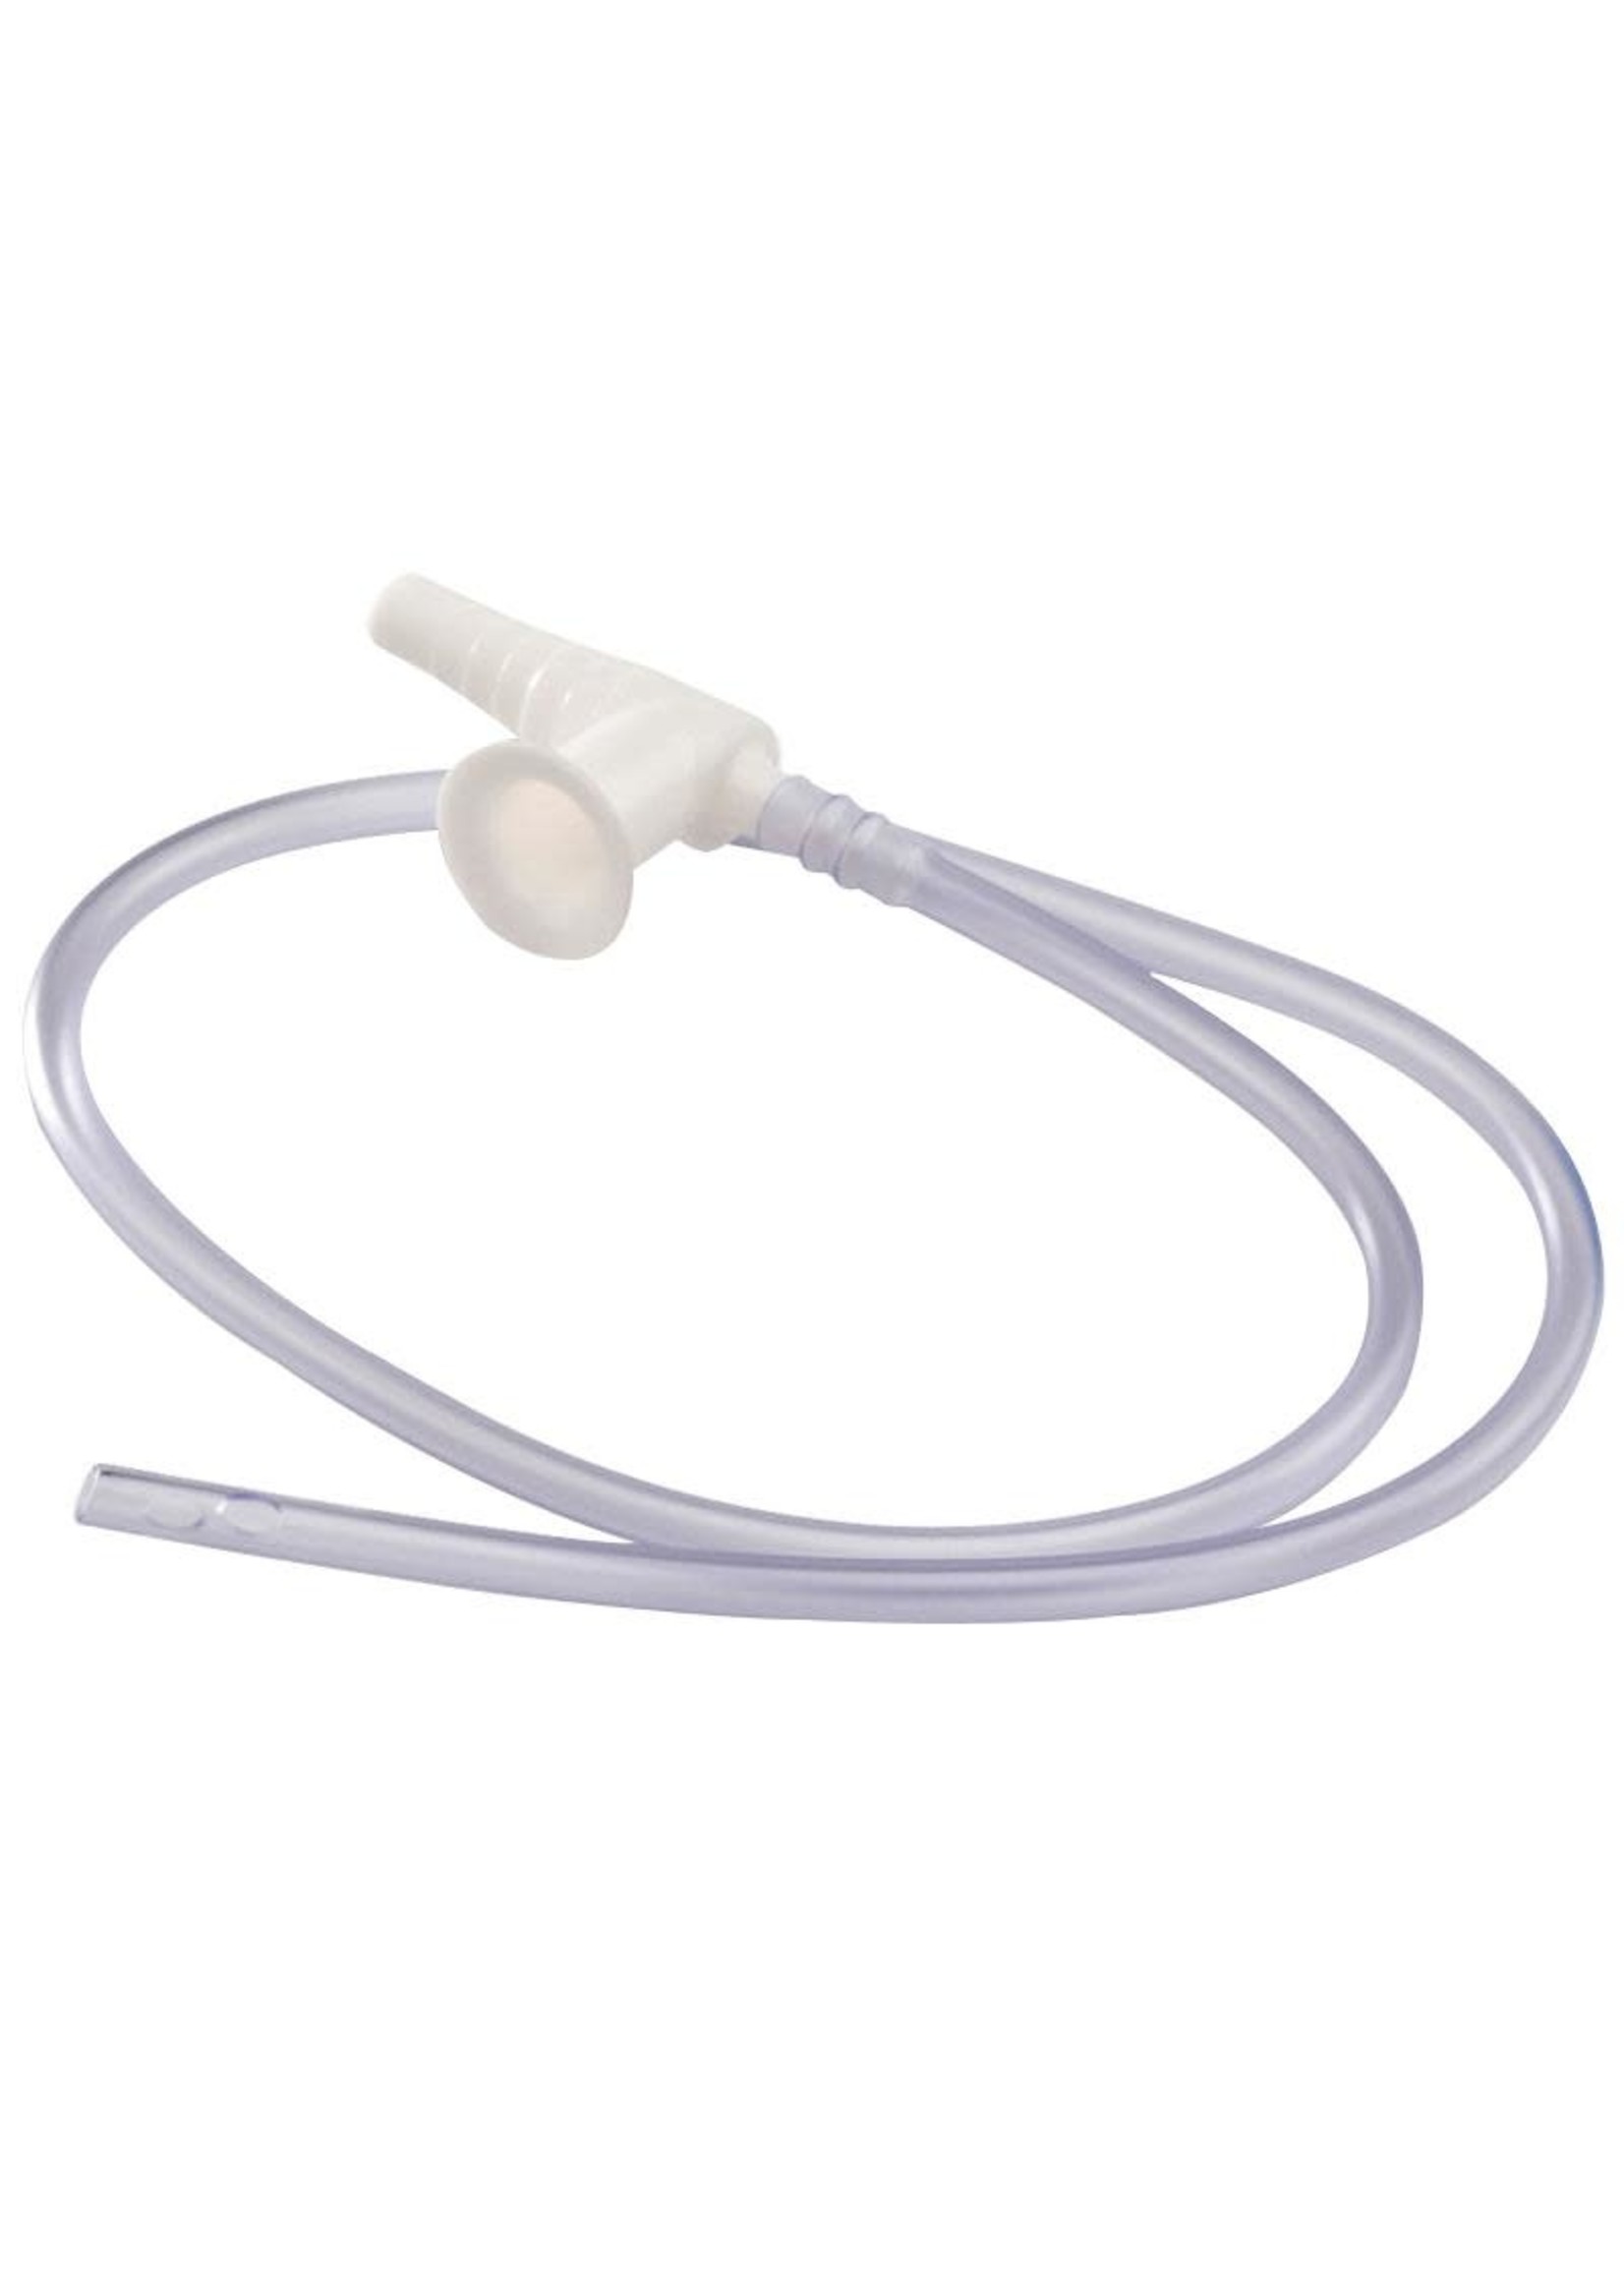 Suction Catheter, 10 French